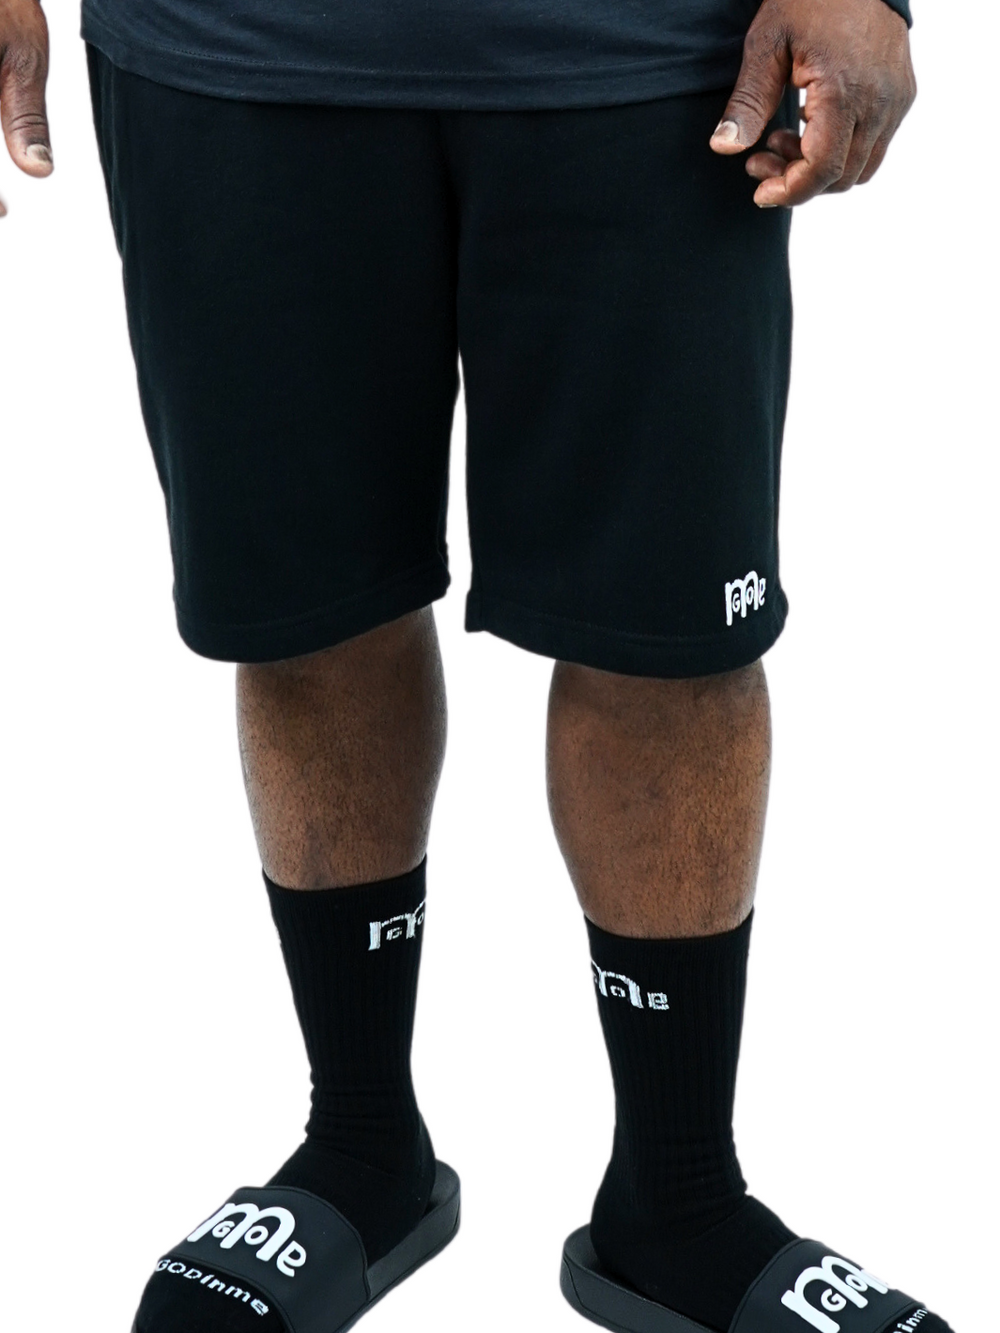 Perfect for any occasion, these Black GODinme shorts provide an actively casual fit, jersey lined side and back pockets, elastic waistband, sewn eyelets, and fly details: providing the ultimate pair of shorts for any man of faith. But the White GODinme logo at left leg is the tell all, combining faith with fashion.